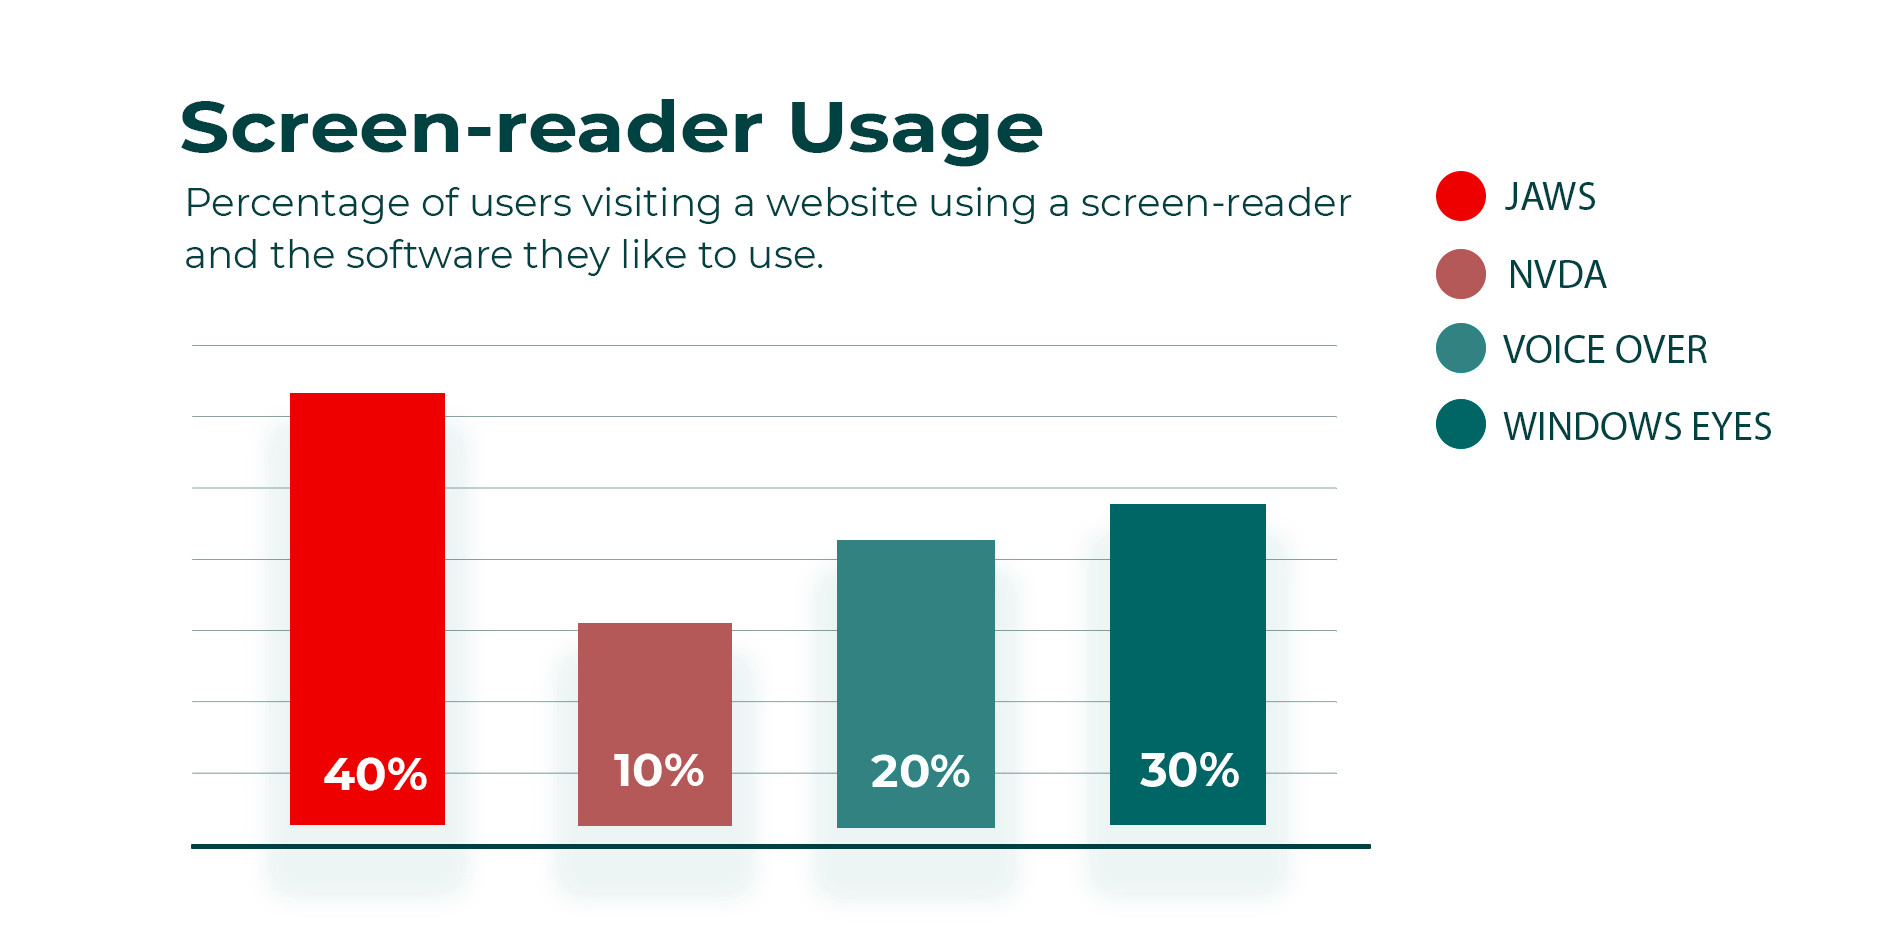 Figure 8 – Blue Blind. An example of a bar chart graphic affected by a Blue Blind color deficiency, the design relies on color to convey meaning. The colors in the graphic are being affected by a blue blind color deficiency. The colors look very similar, and it is hard to tell them apart. The graphic reads - Percentage of users visiting a website using a screen-reader and the software they like to use. 40% JAWS, 10% NVDA, 20% Voice Over, 30% Windows Eyes.